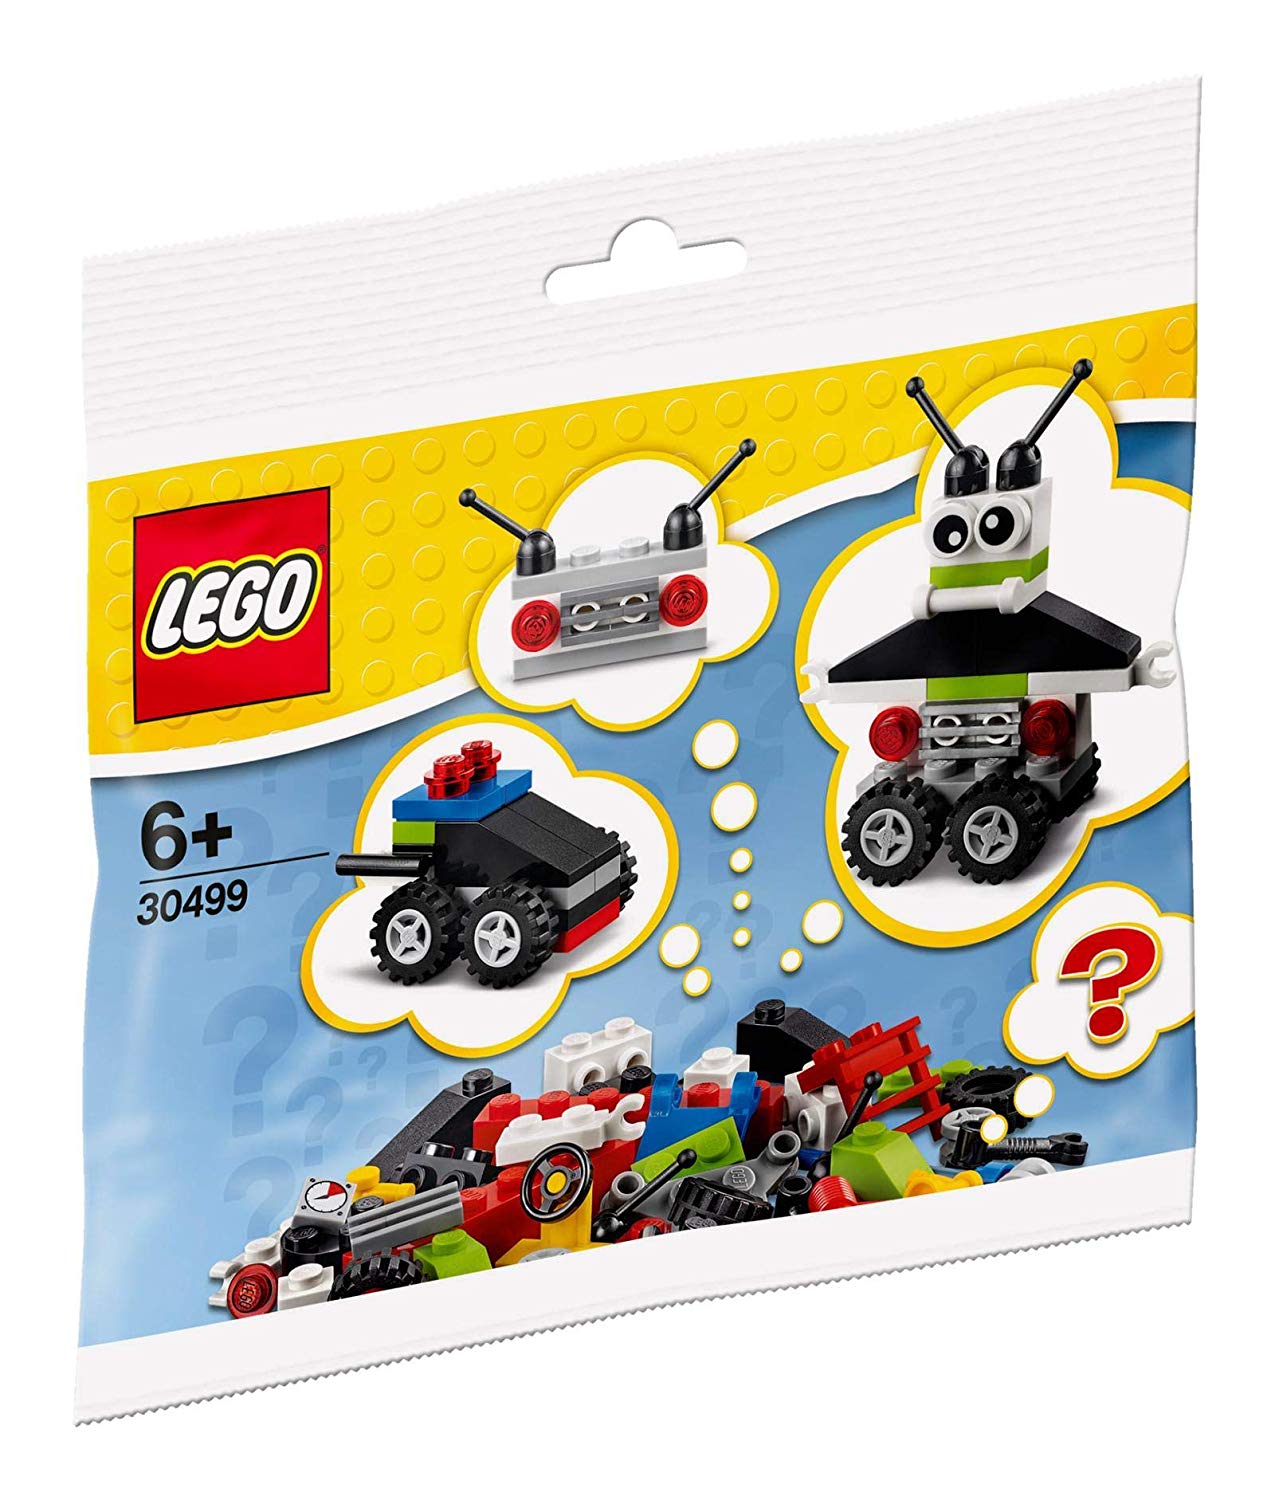 Lego Robot And Vehicle Free Builds A